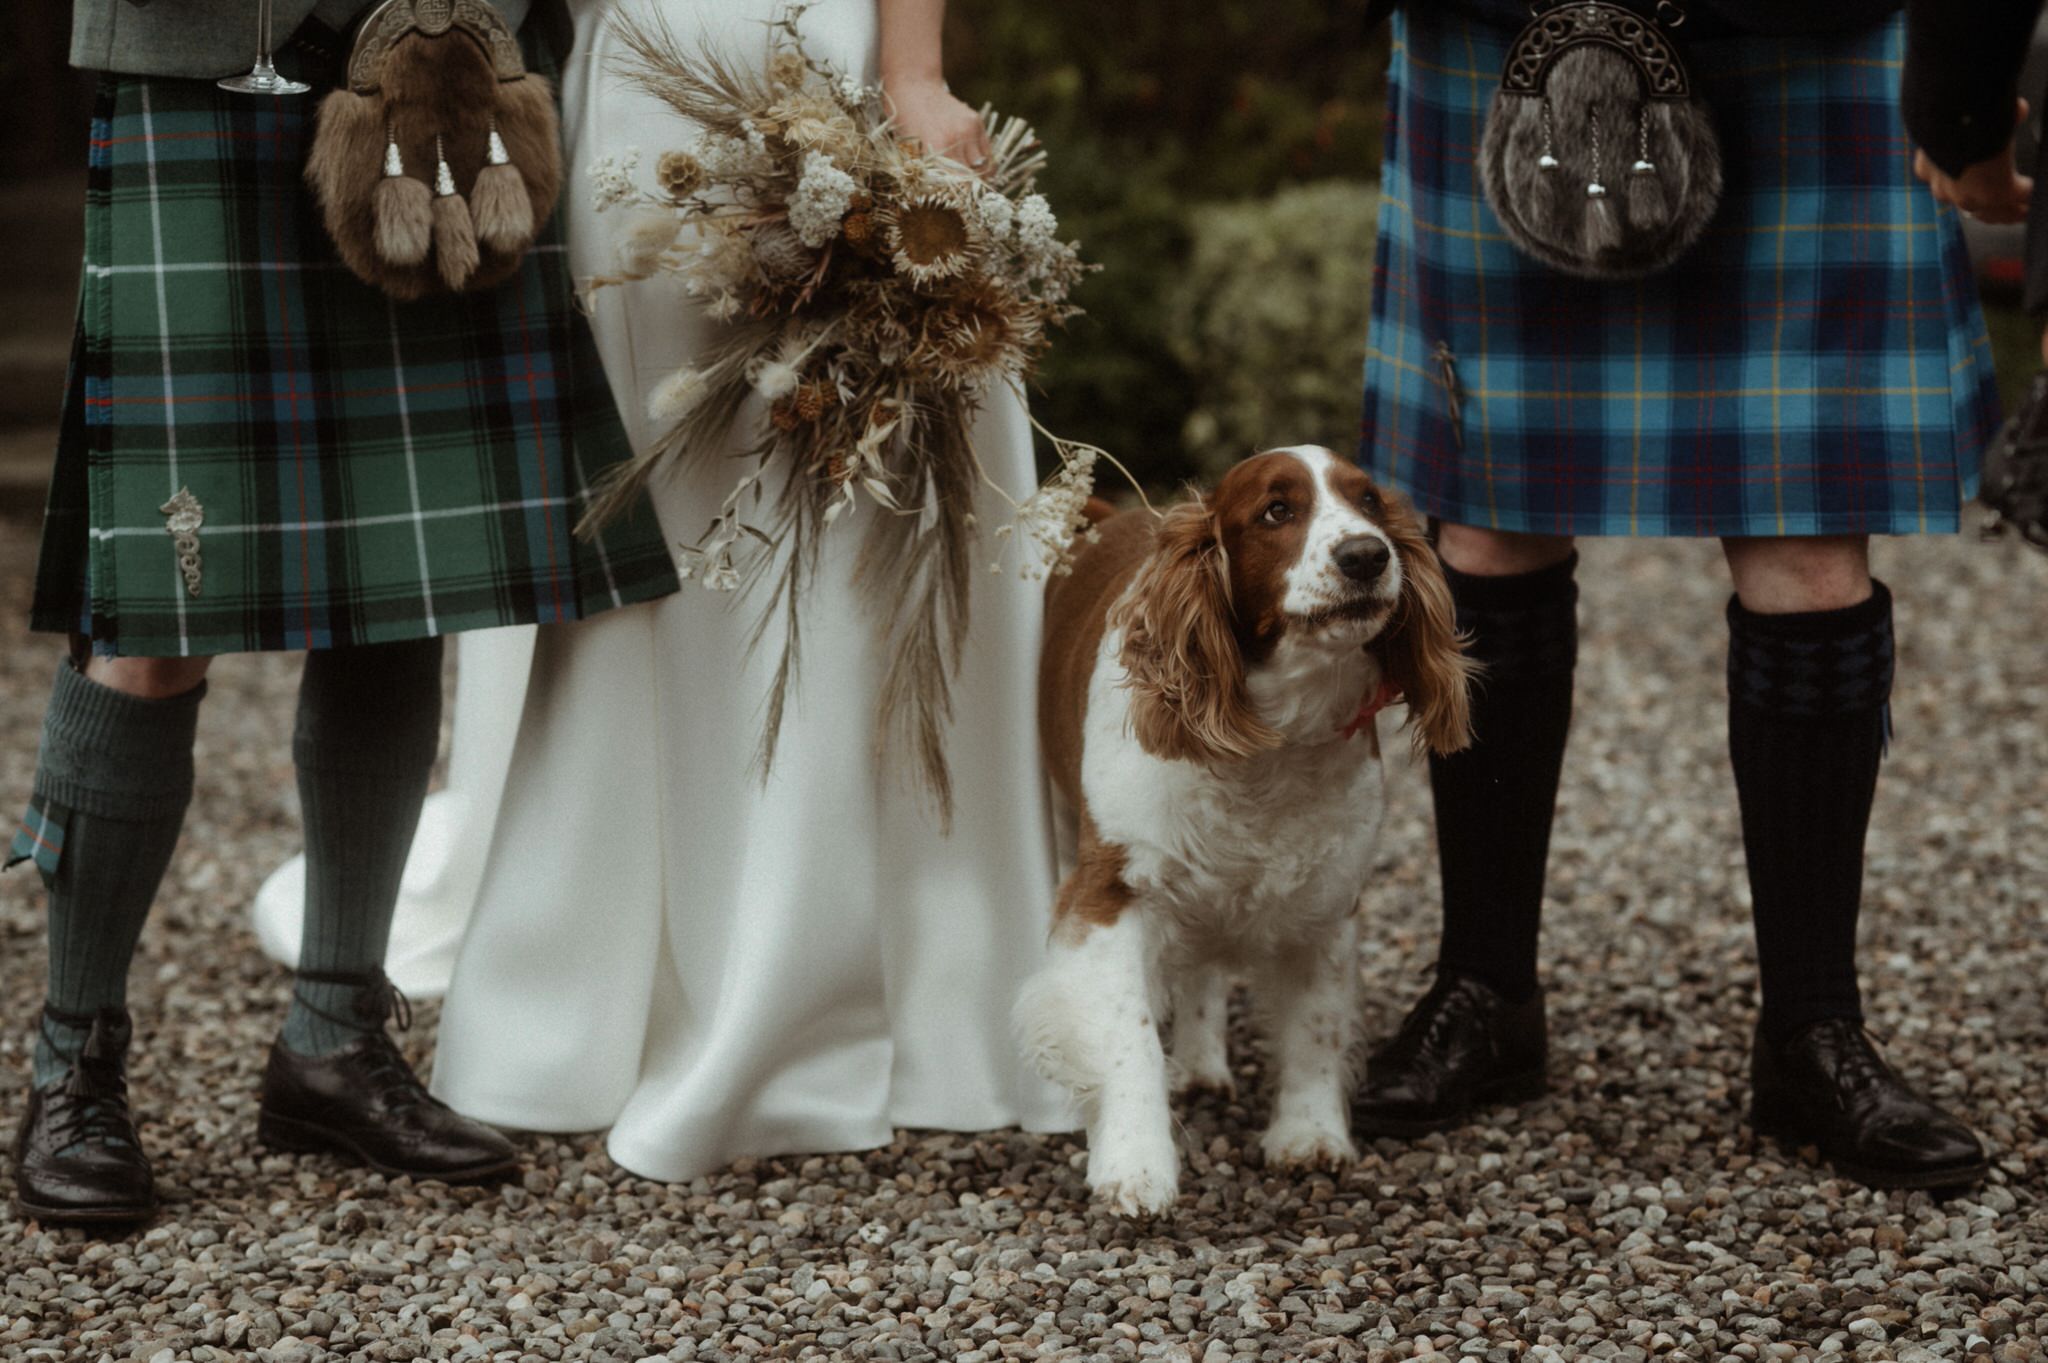 spaniel dog standing between two men in kilts and bride at a Scottish wedding